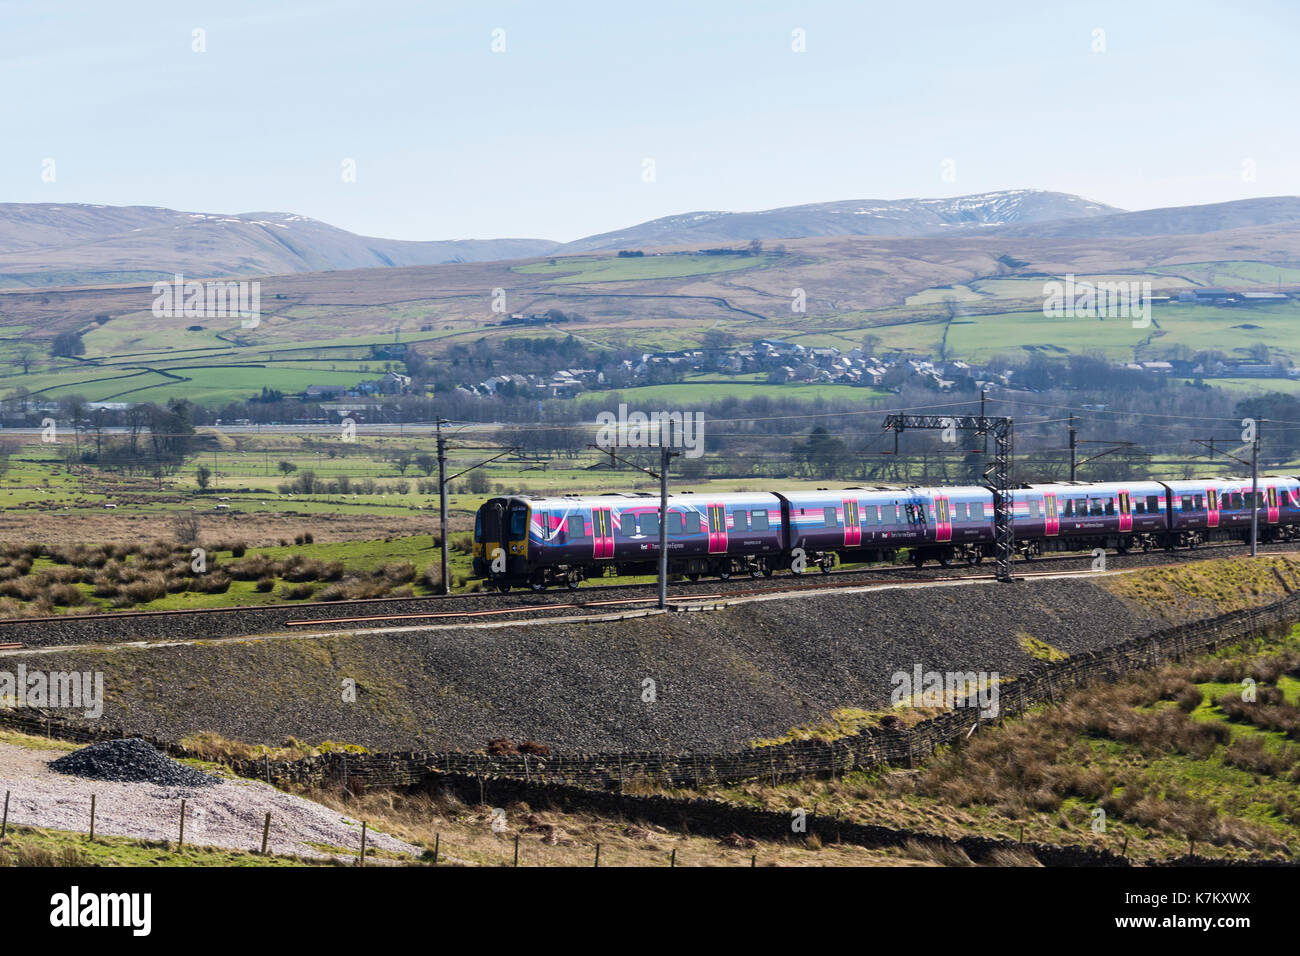 Class 350 electric multiple unit (emu) passenger train operated by FirstTransPennine Express, passing Tebay as it ascends Shap on March 25th 2017, hea Stock Photo